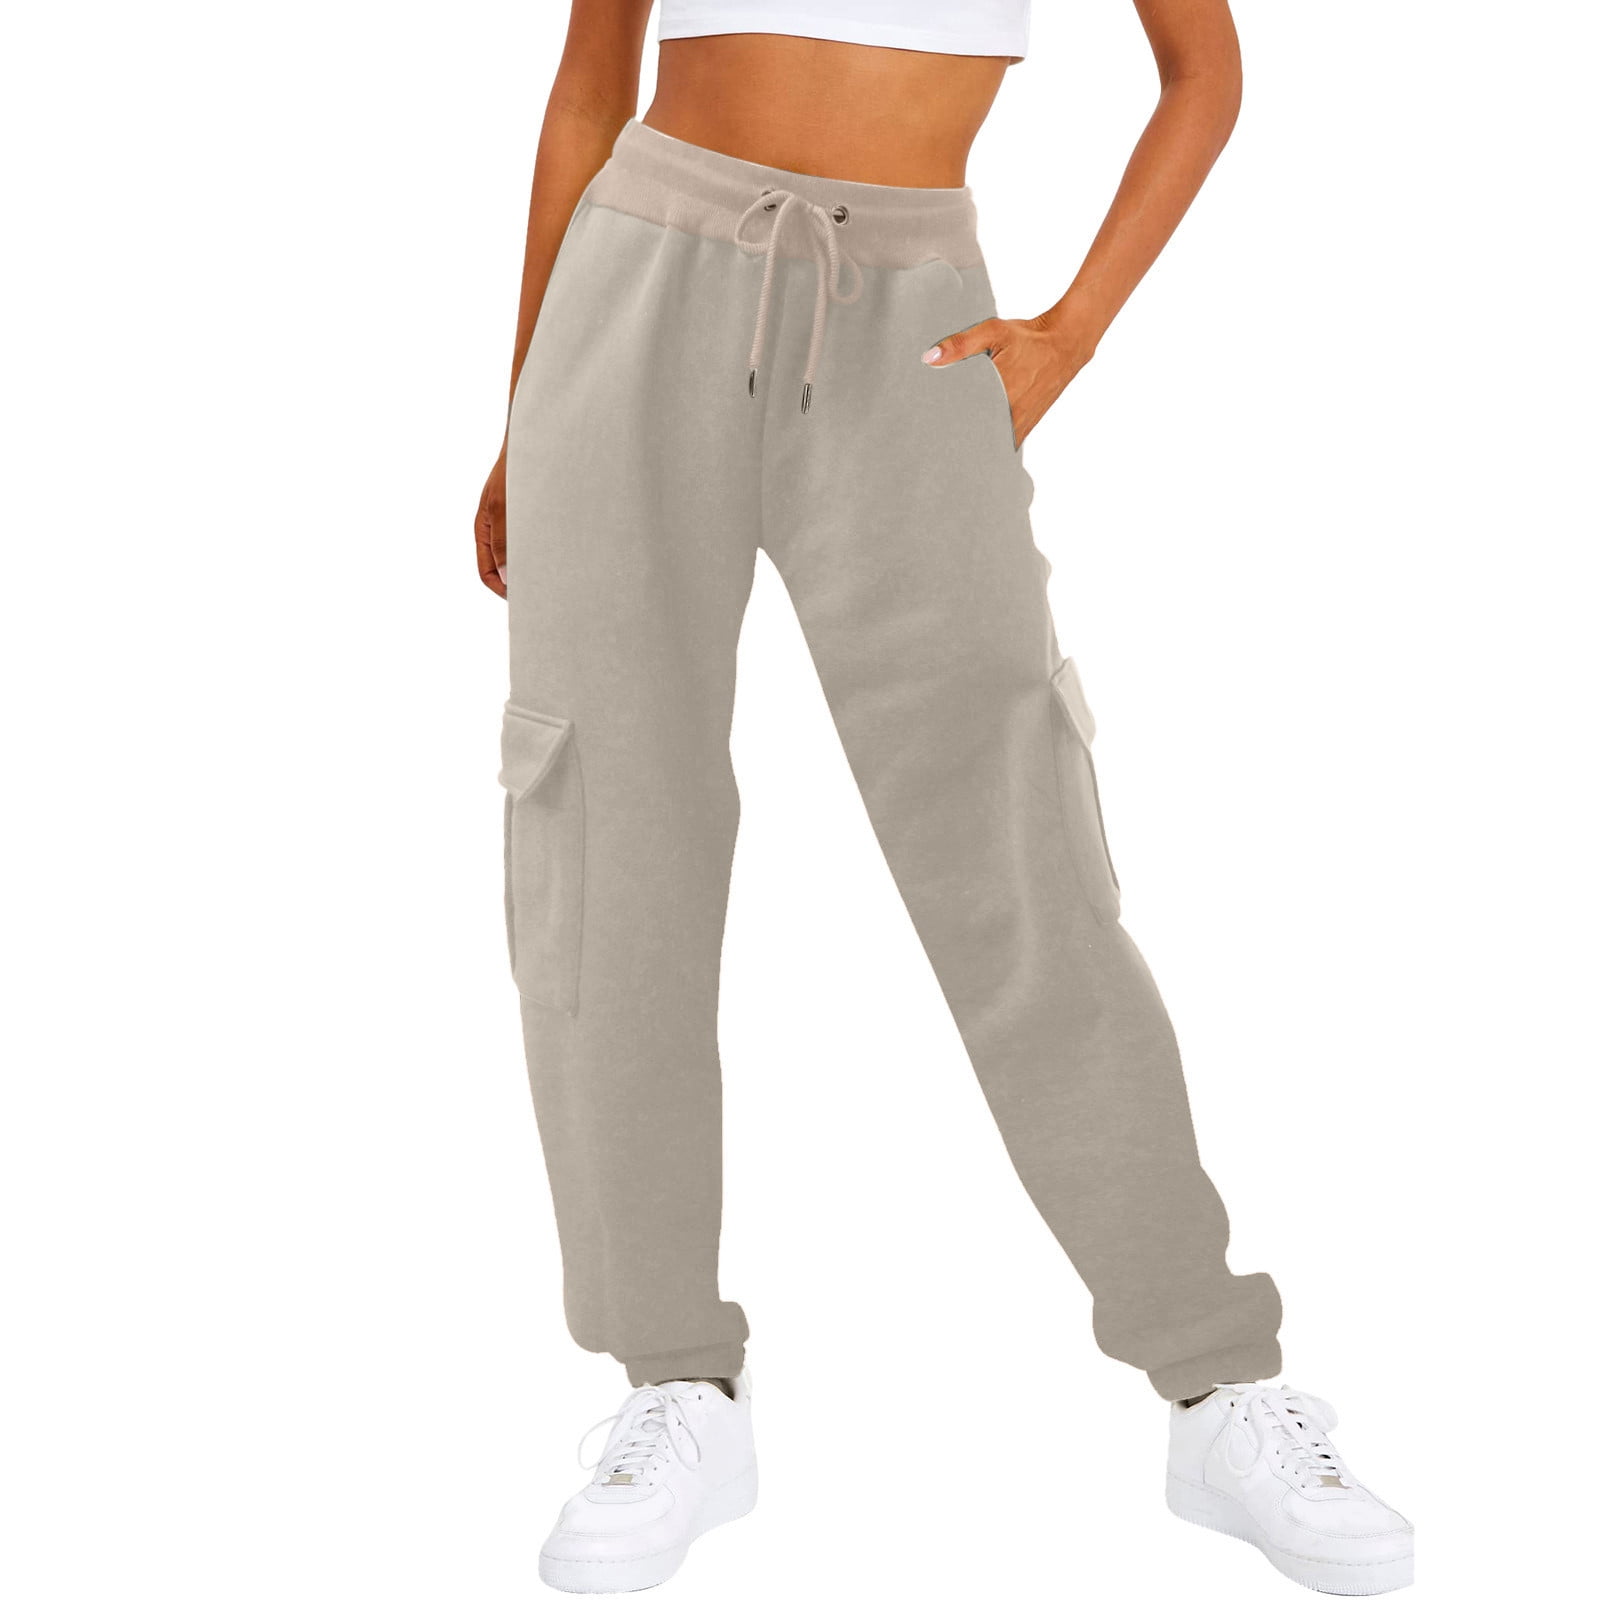 Susanny Petite Sweatpants for Women Elastic Ankle Cinch Bottom Drawstring  High Waisted with Pockets Straight Leg Sweat Pants Fall Cotton Baggy Pants